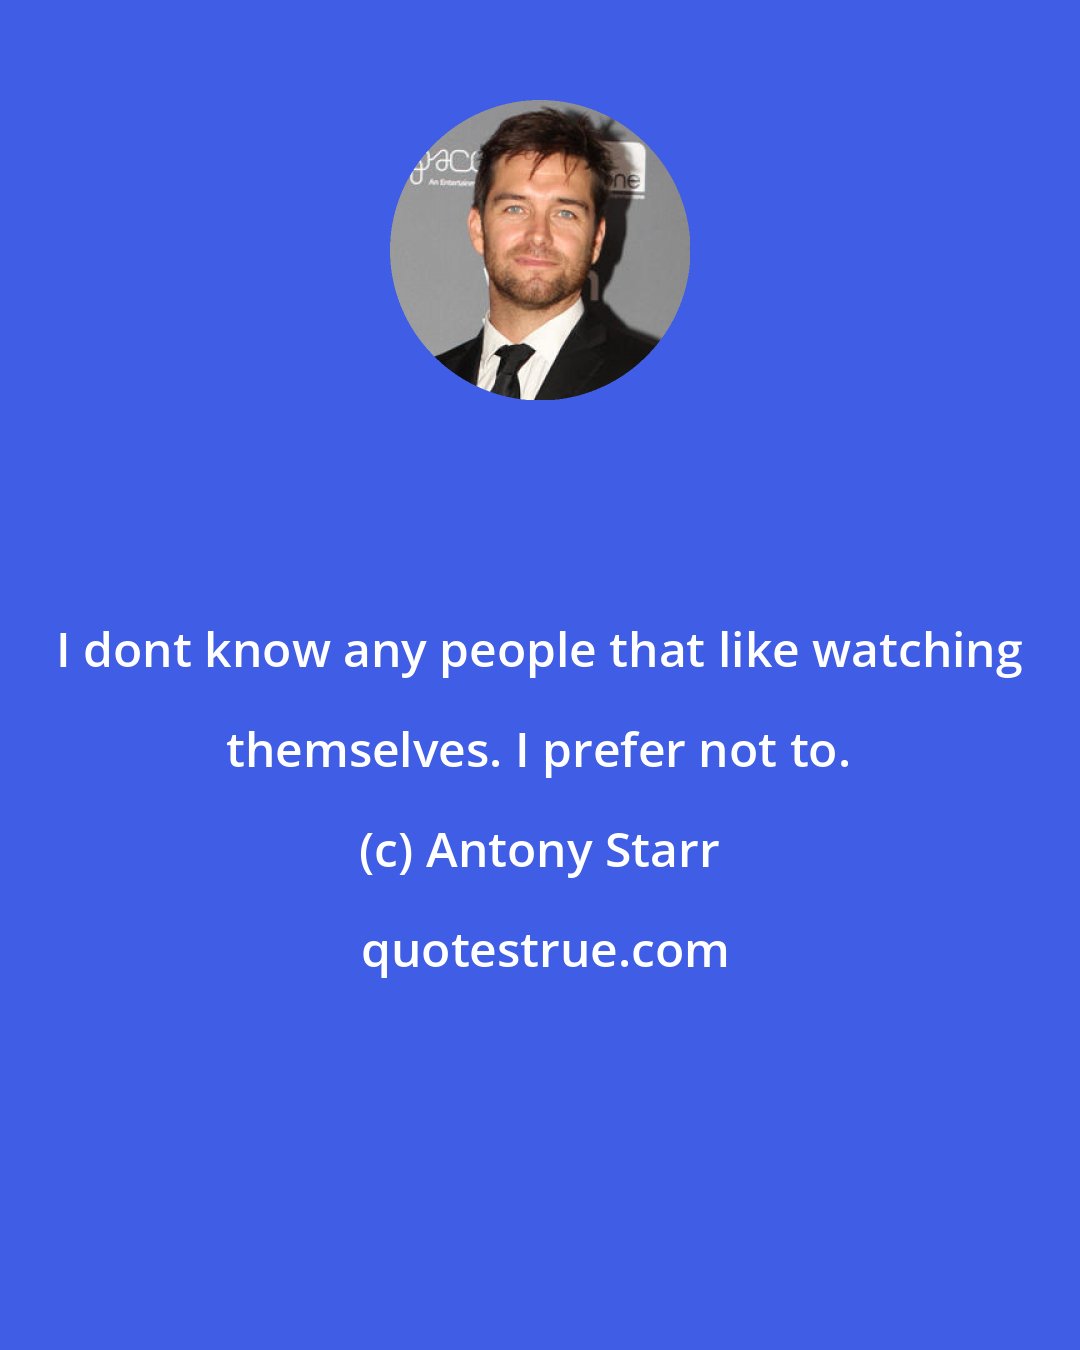 Antony Starr: I dont know any people that like watching themselves. I prefer not to.